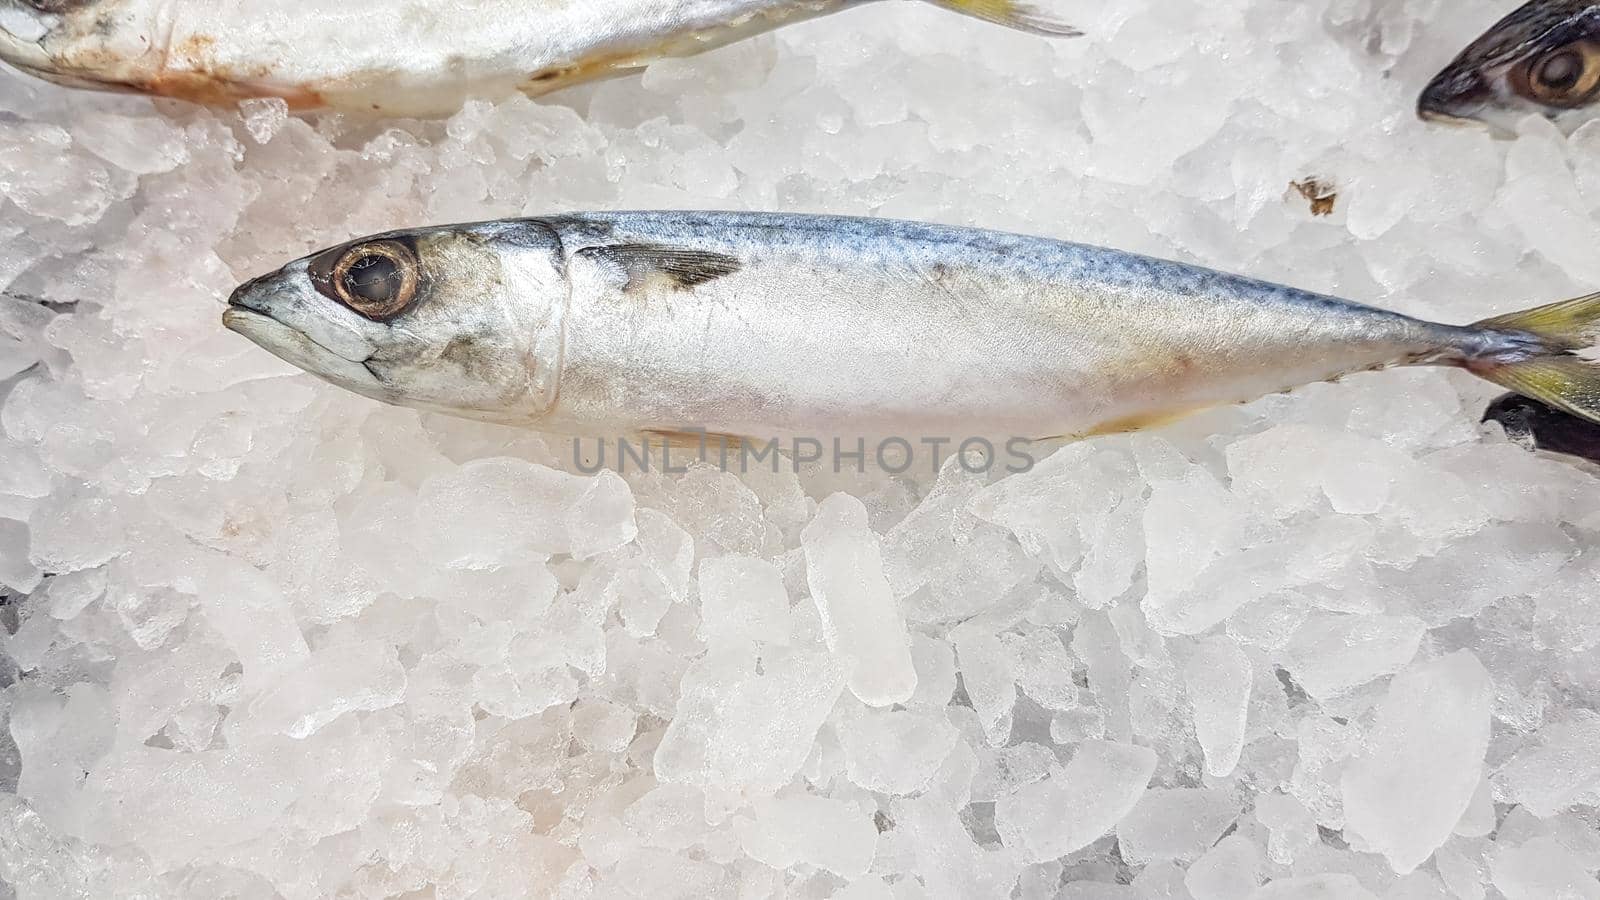 Sardines frozen in ice to keep them fresh for sale to customers in a store.